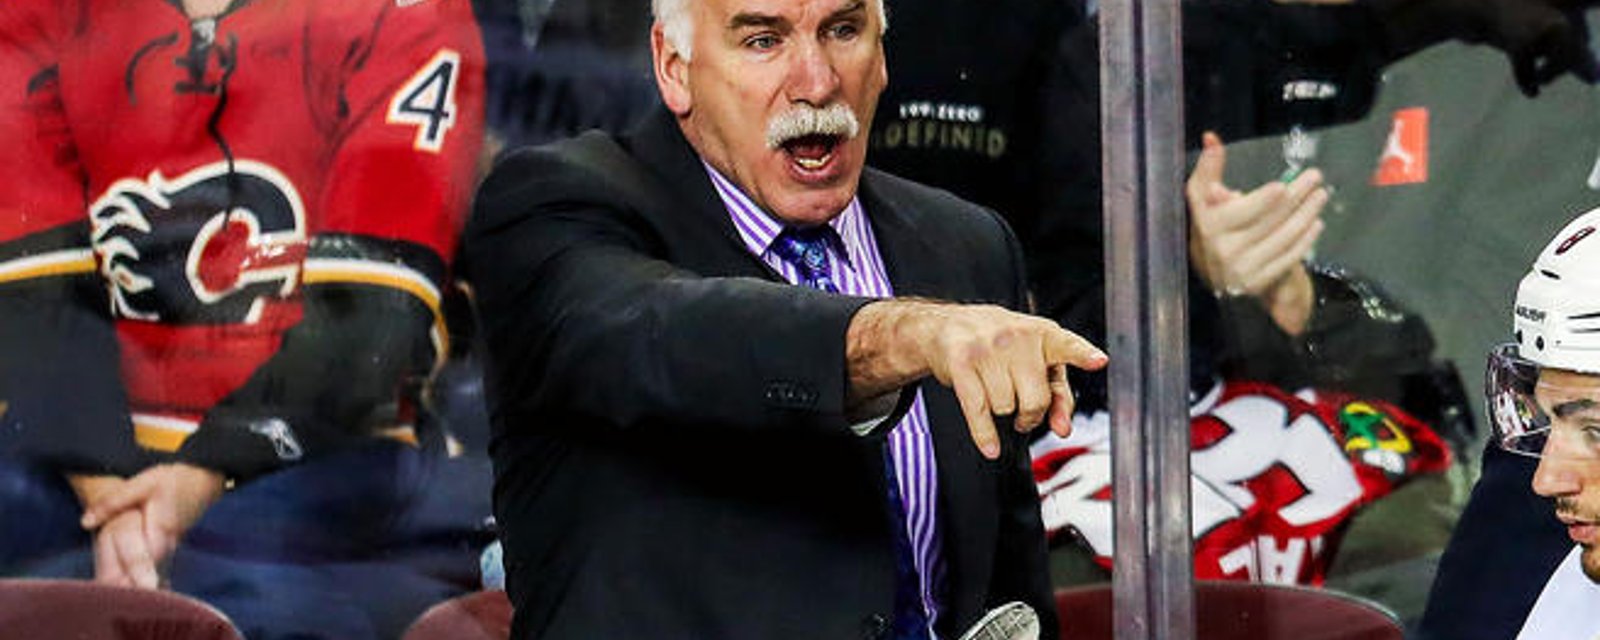 One Western club going all-in to sign Quenneville?